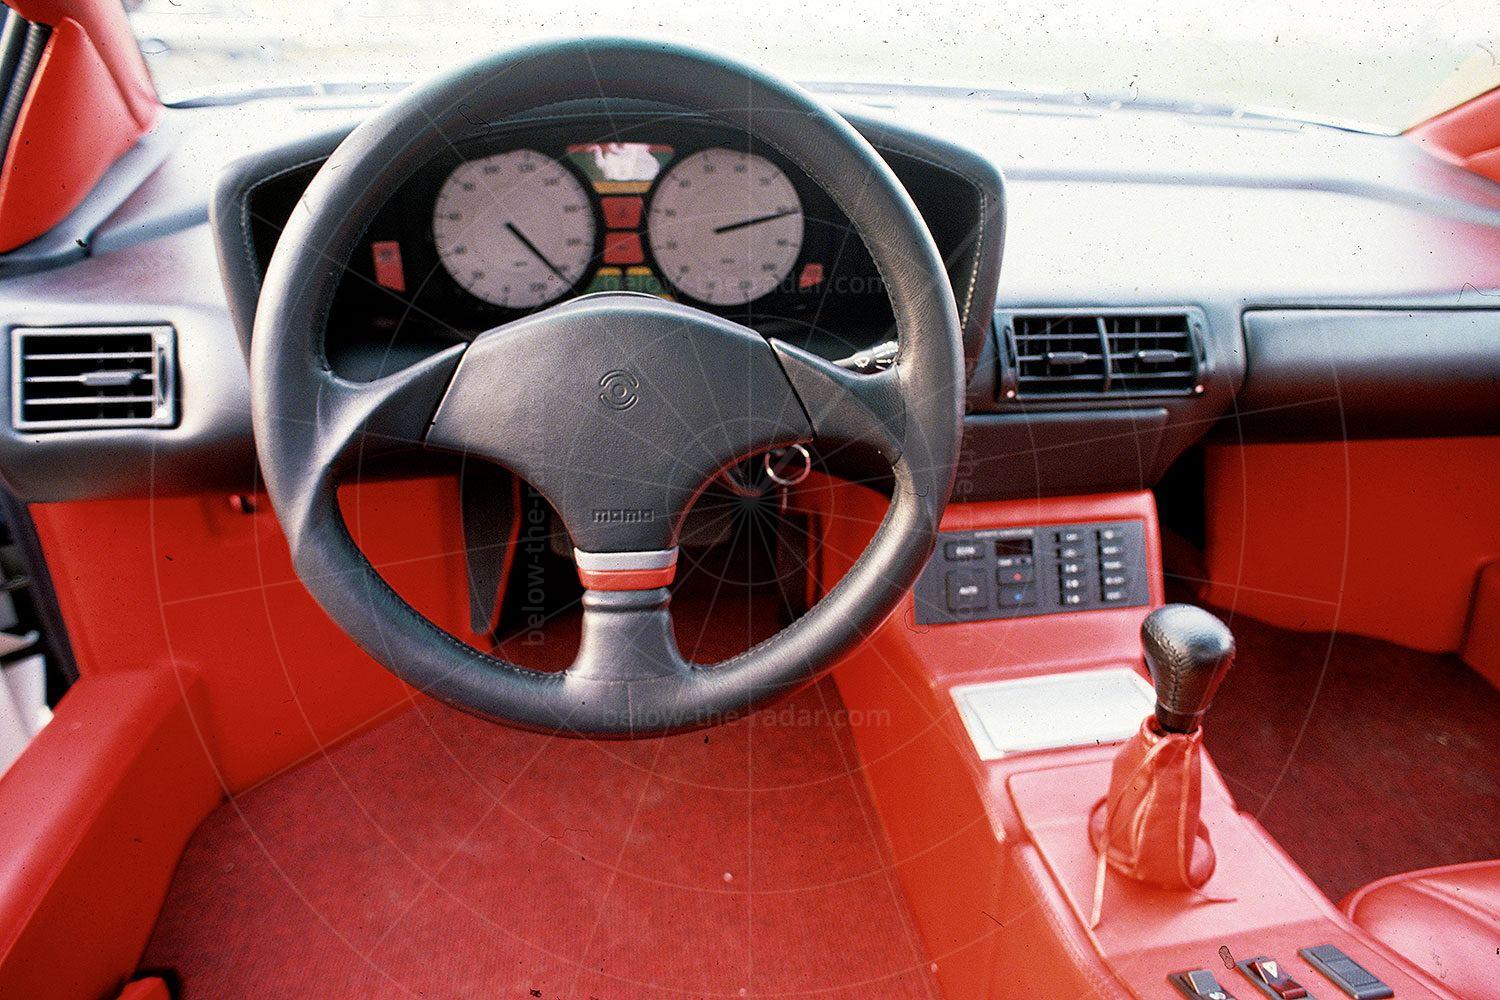 The dashboard of the Cizeta V16T Pic: magiccarpics.co.uk | The dashboard of the Cizeta V16T